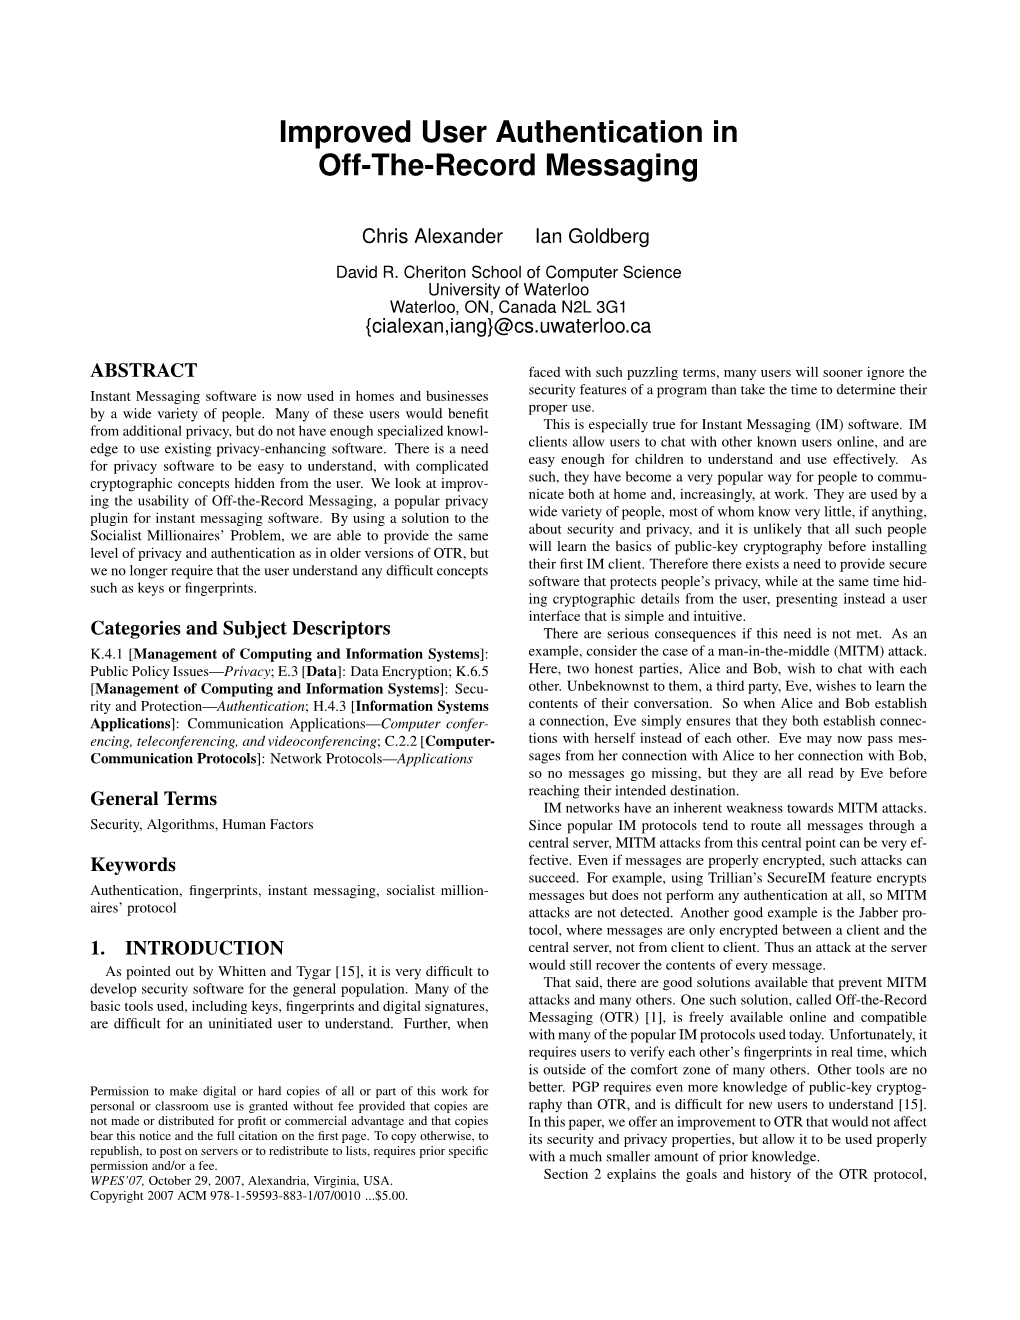 Improved User Authentication in Off-The-Record Messaging